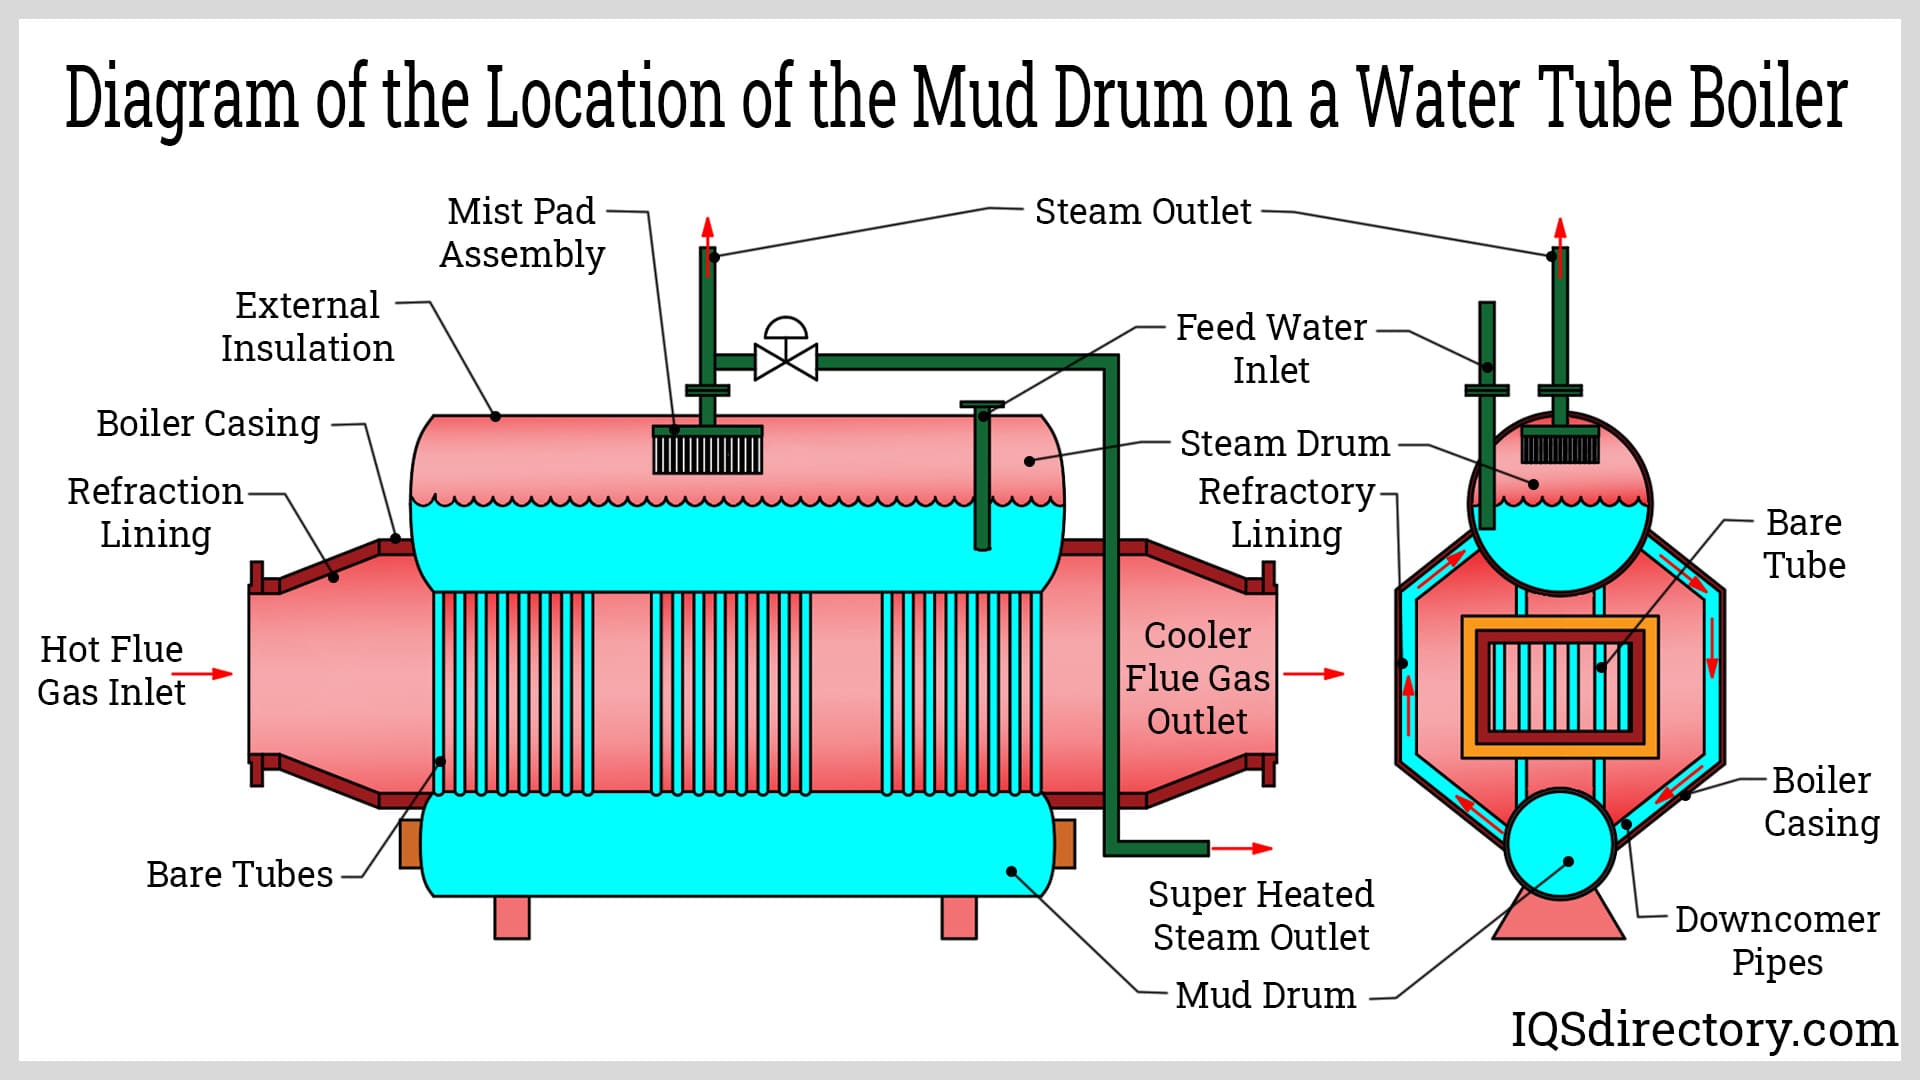 Diagram of the Location of the Mud Drum on a Water Tube Boiler